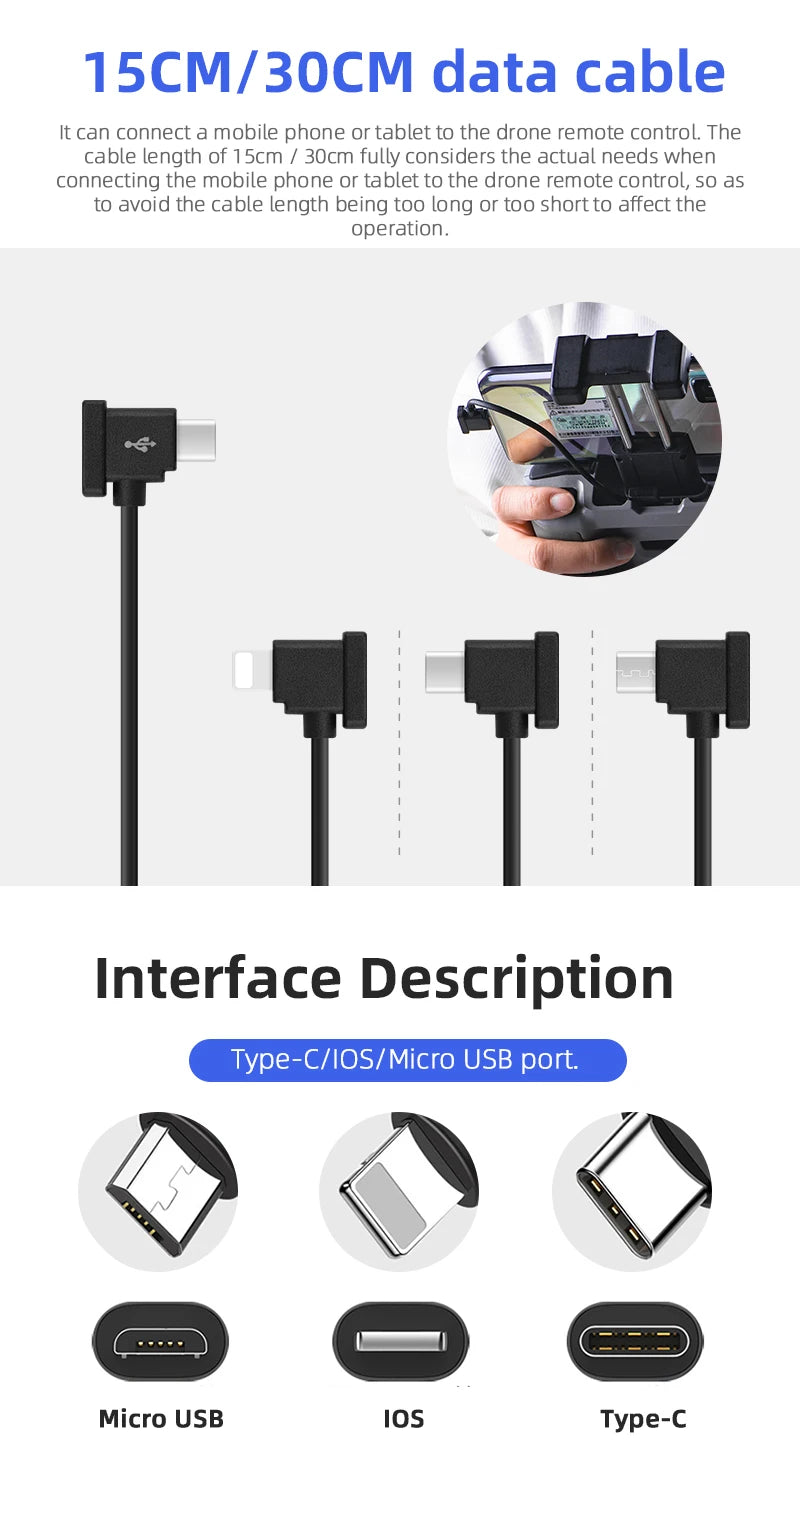 15CM/BOCM data cable can connect a mobile phone or tablet to the drone remote